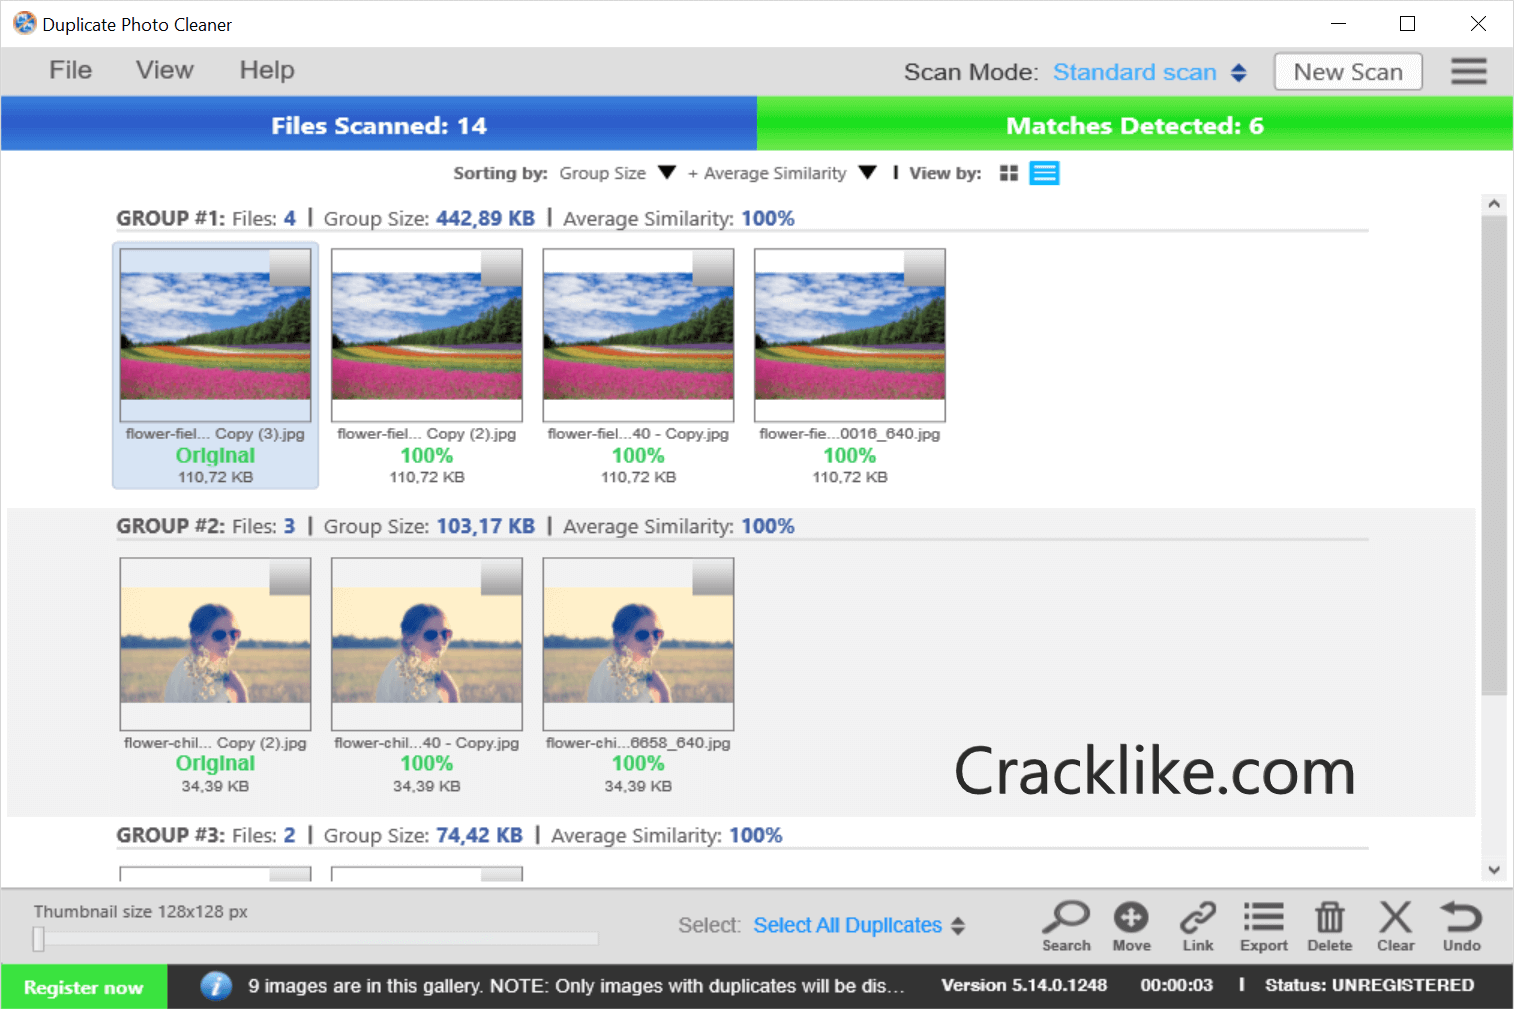 Duplicate Photo Cleaner 7.7.0.14 Crack With License Key Latest Version Free Download 2022